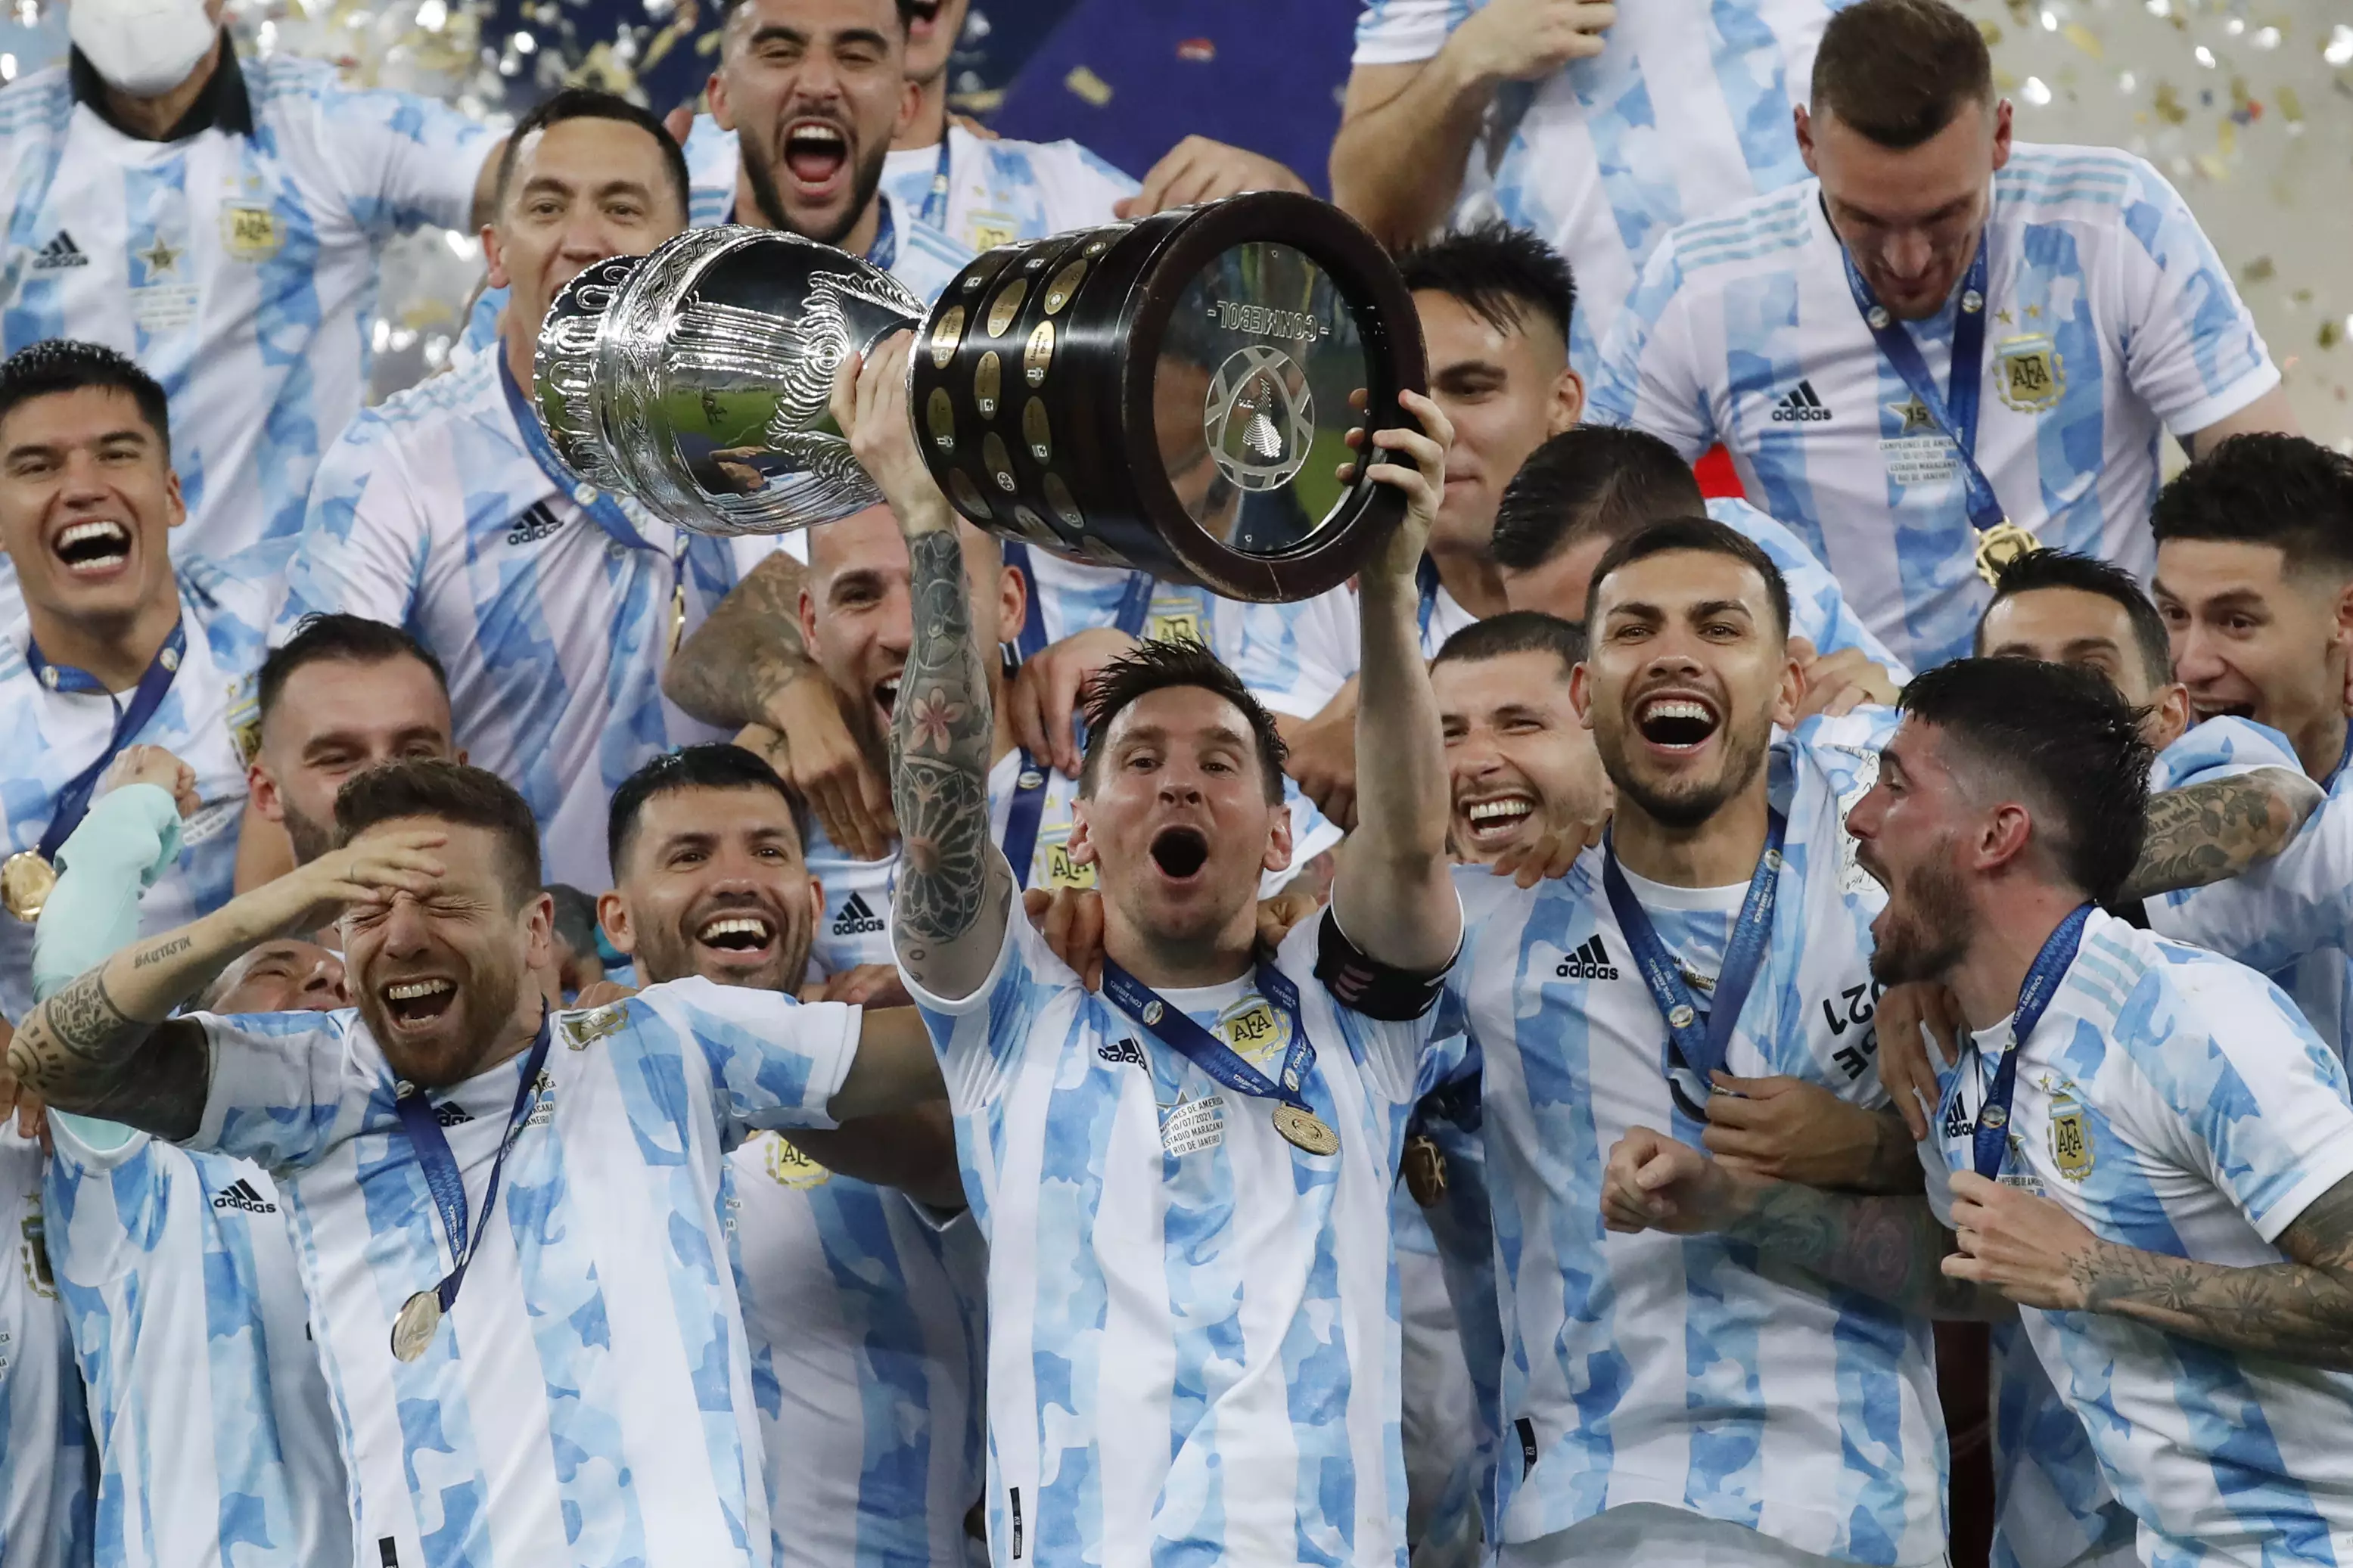 Lionel Messi hoists the trophy up after Argentina beat Brazil in the Copa America (